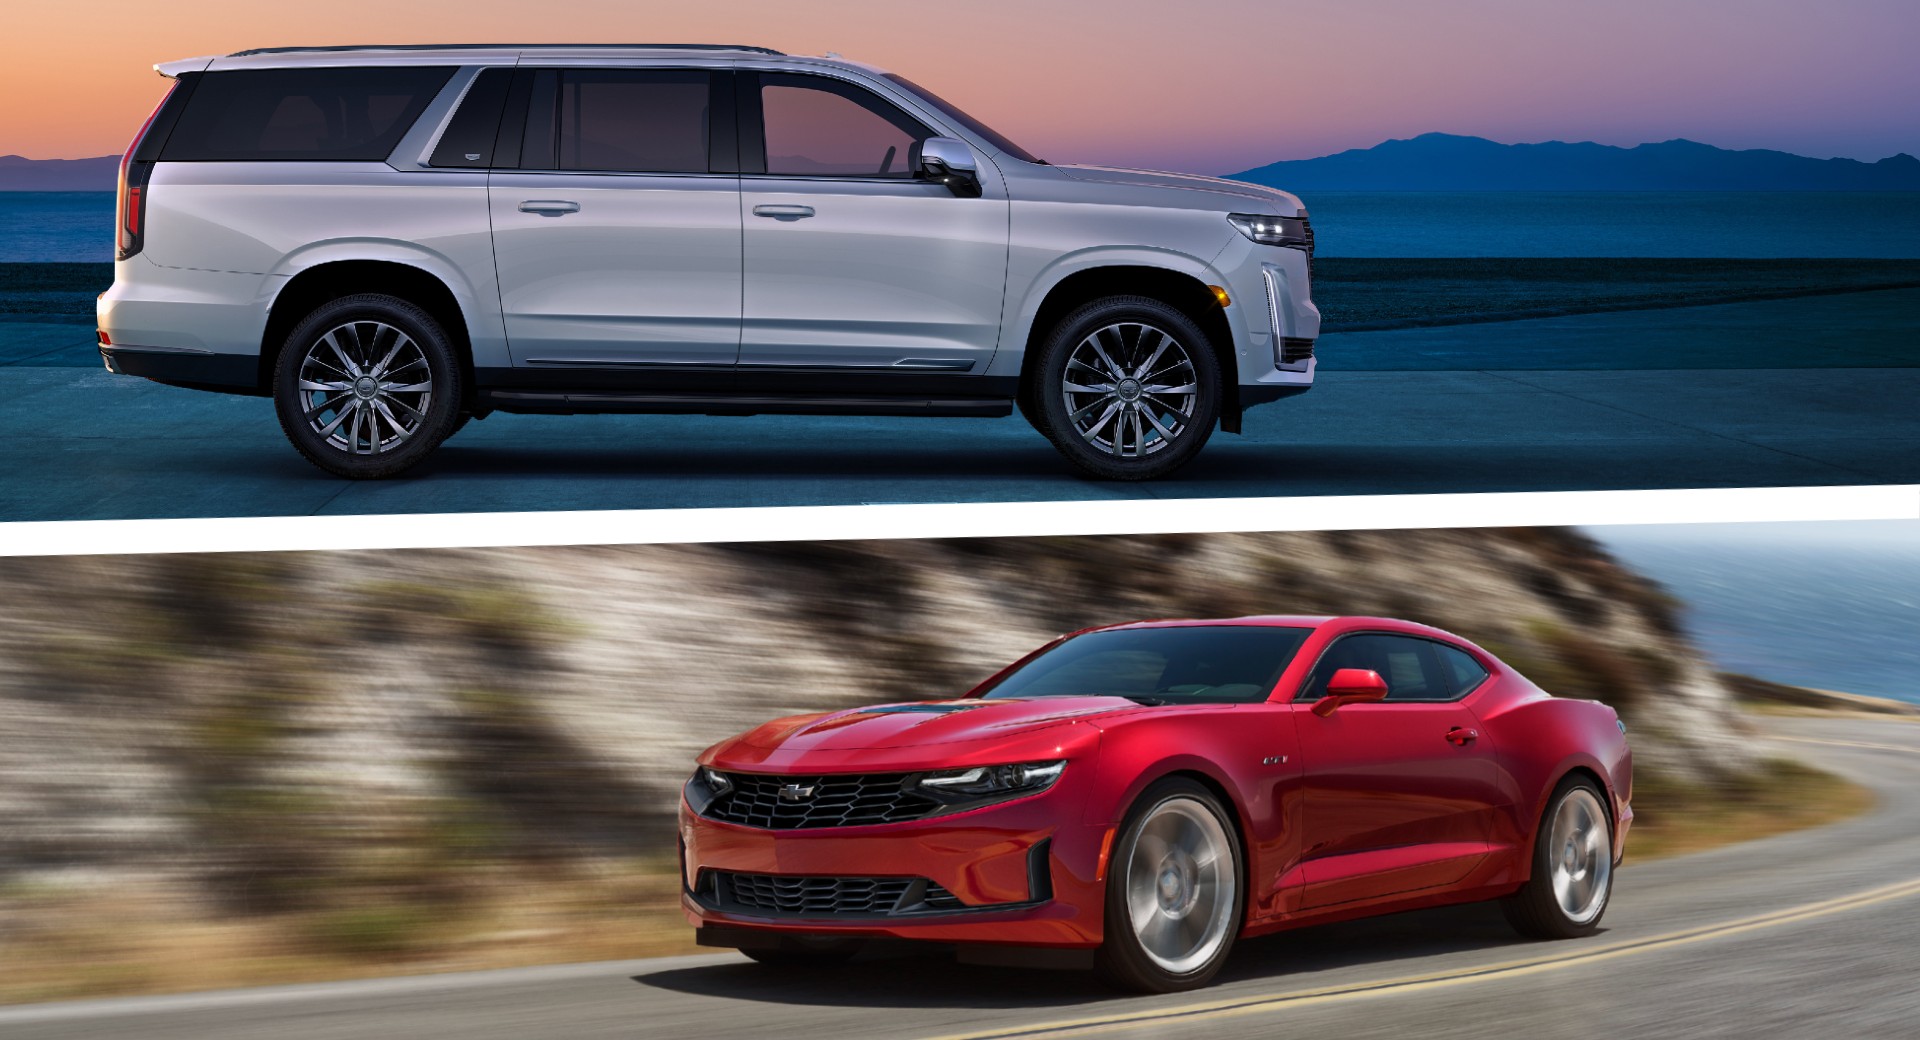 Cadillac Escalade And Chevrolet Camaro To Become The Next GM Sub-Brands |  Carscoops